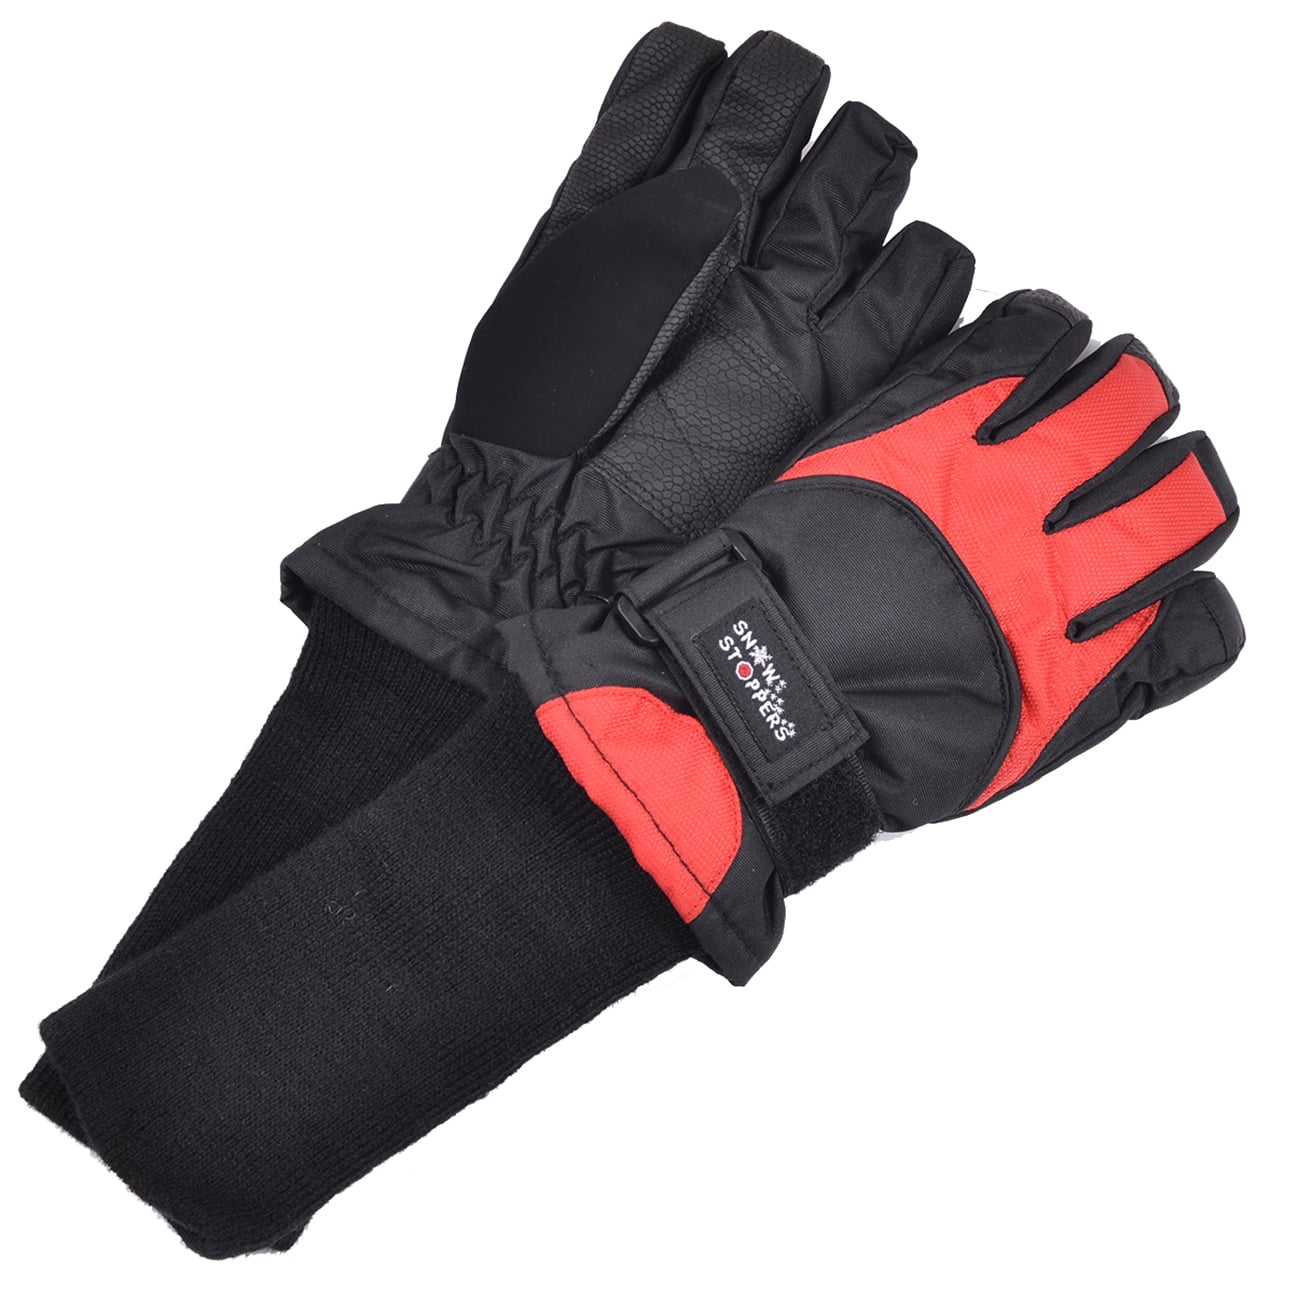 Mission Women's RadiantActive Outdoor Training Performance Midweight Gloves 